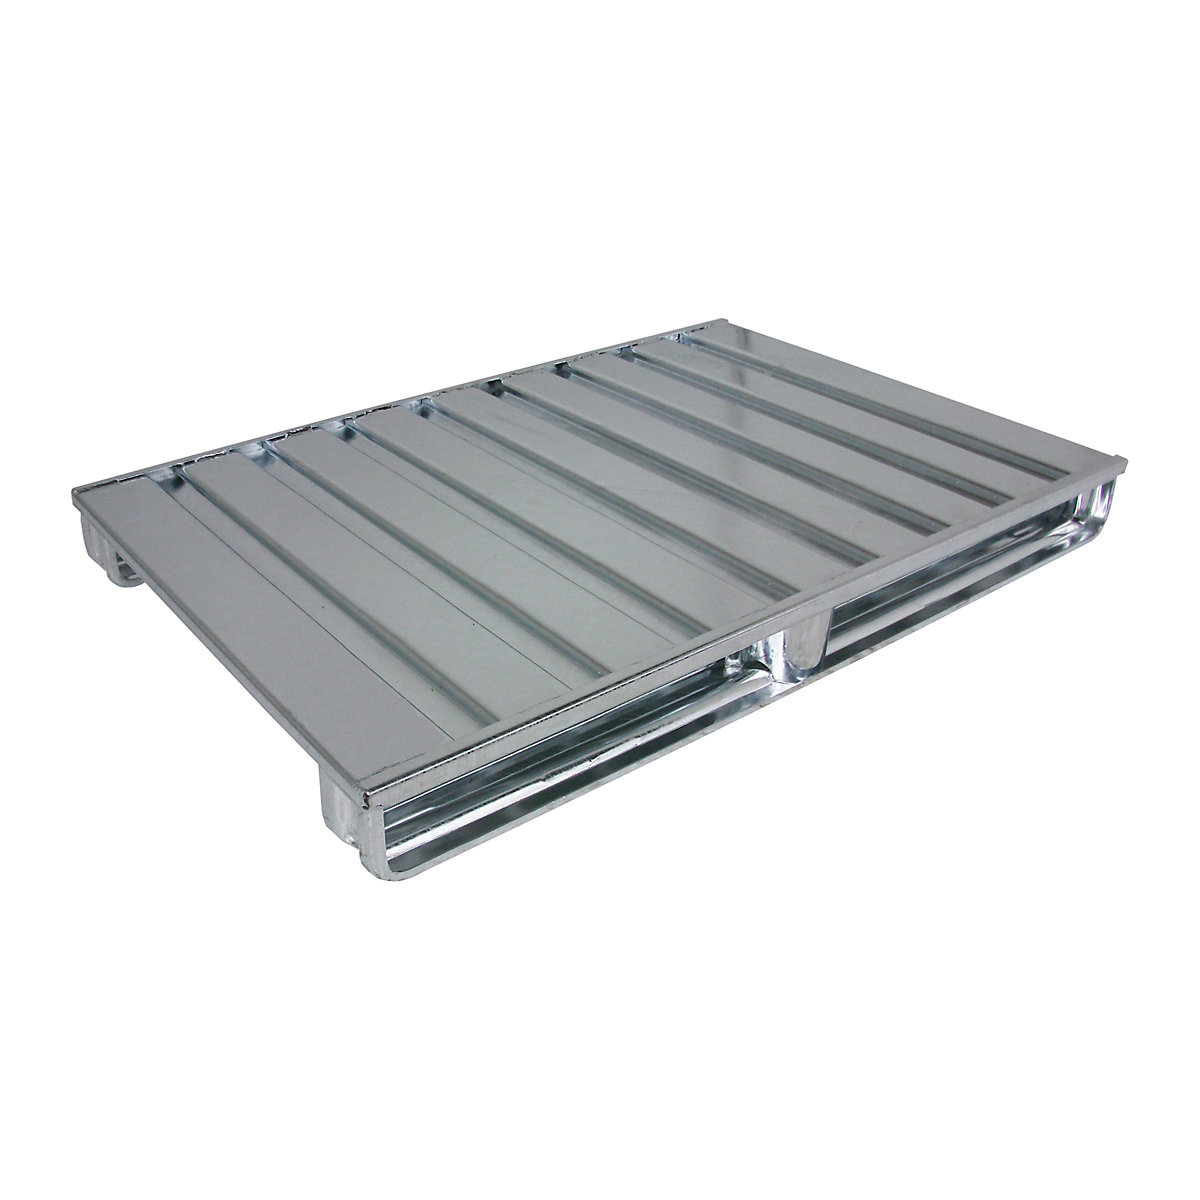 Flat steel pallet – Heson, LxW 1200 x 1000 mm, max. load 1500 kg, zinc plated-3